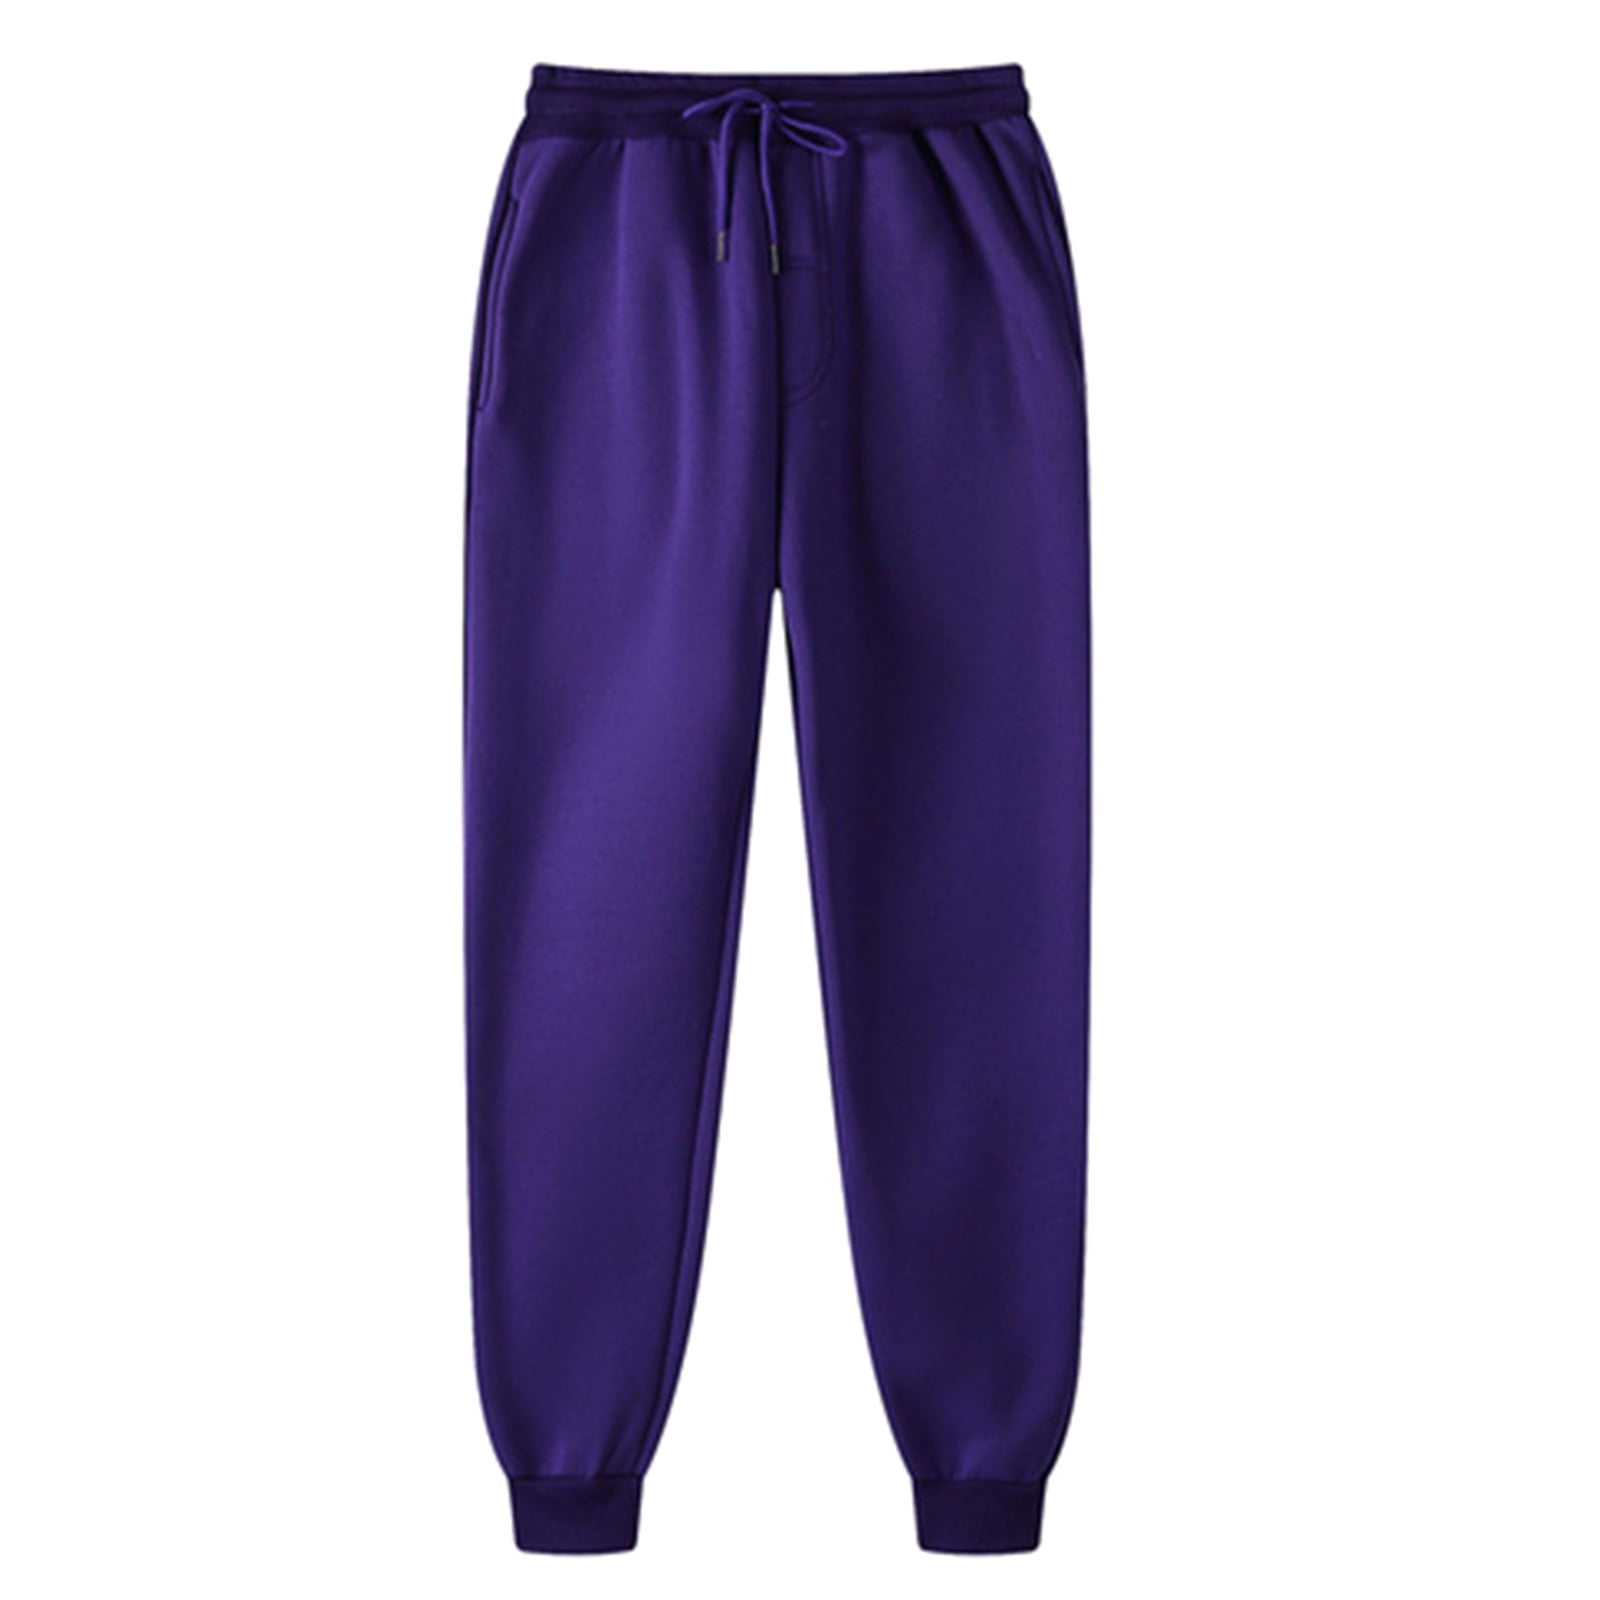 Details about   Men Fitness Athletic Sweatpants Spliced Color Sports Trousers Quick Dry 